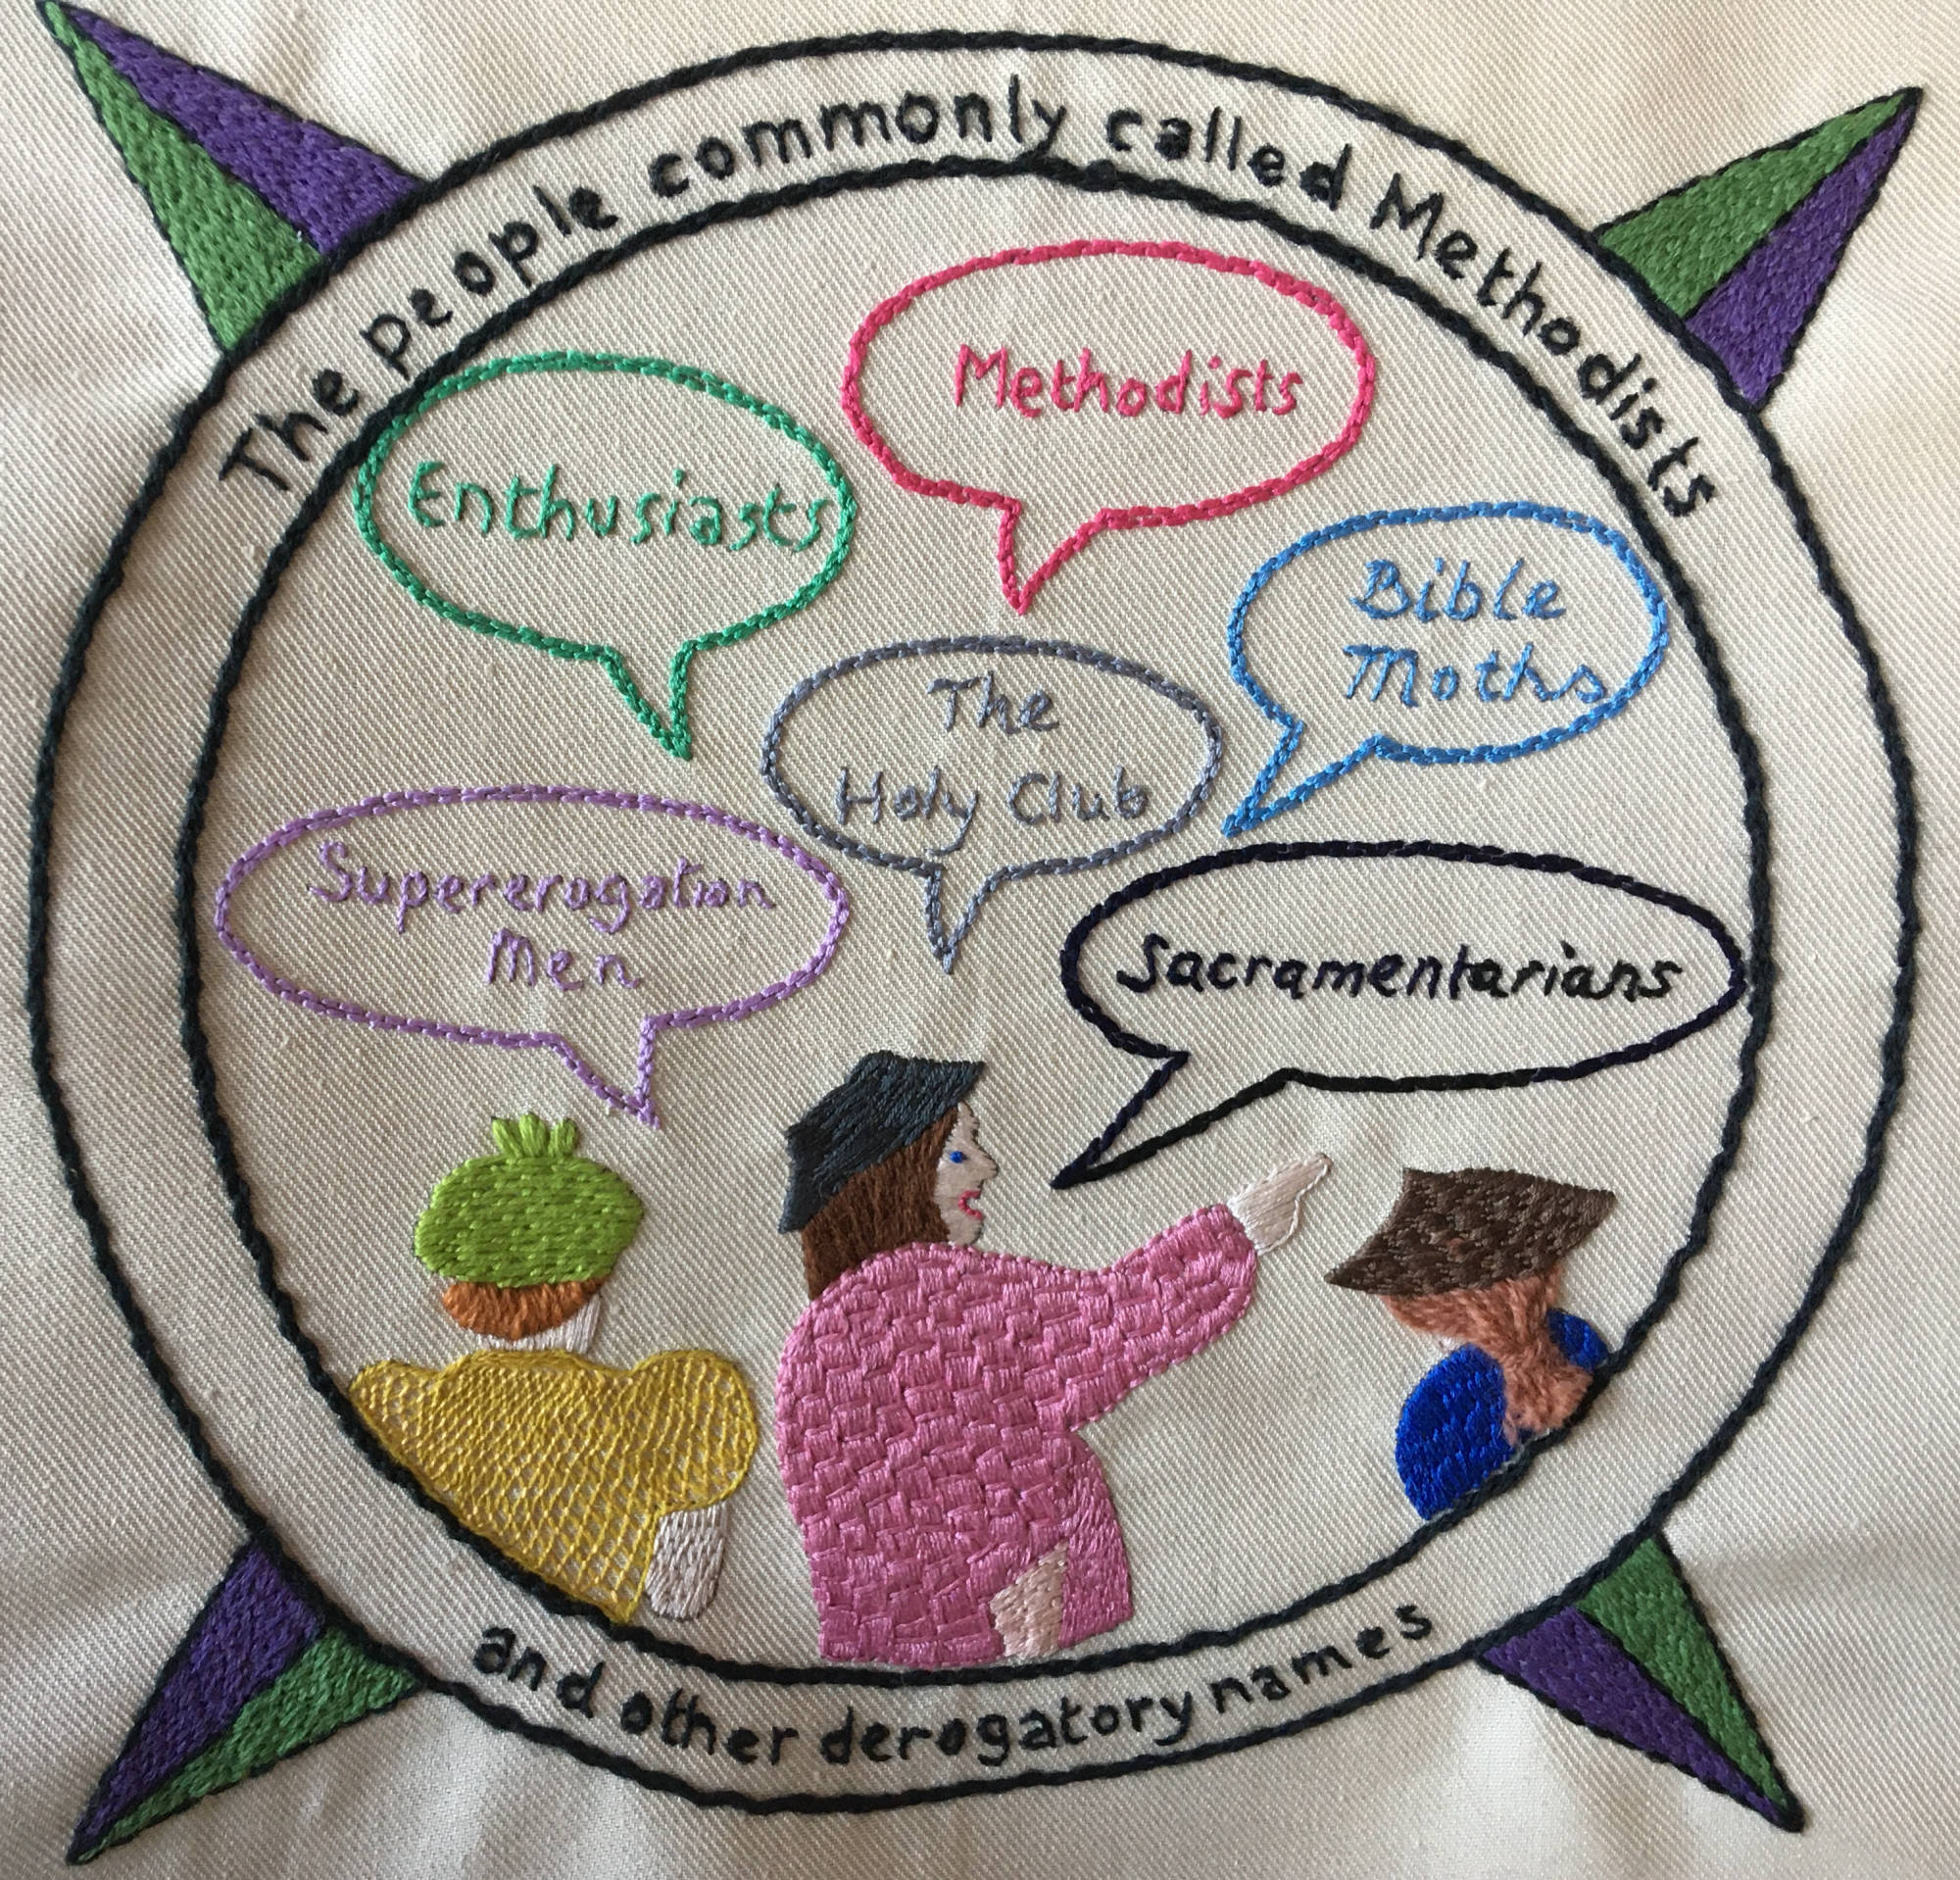 Needlework showing some of the early pejorative terms for Methodists such as Bible Moths and Sacramentarians